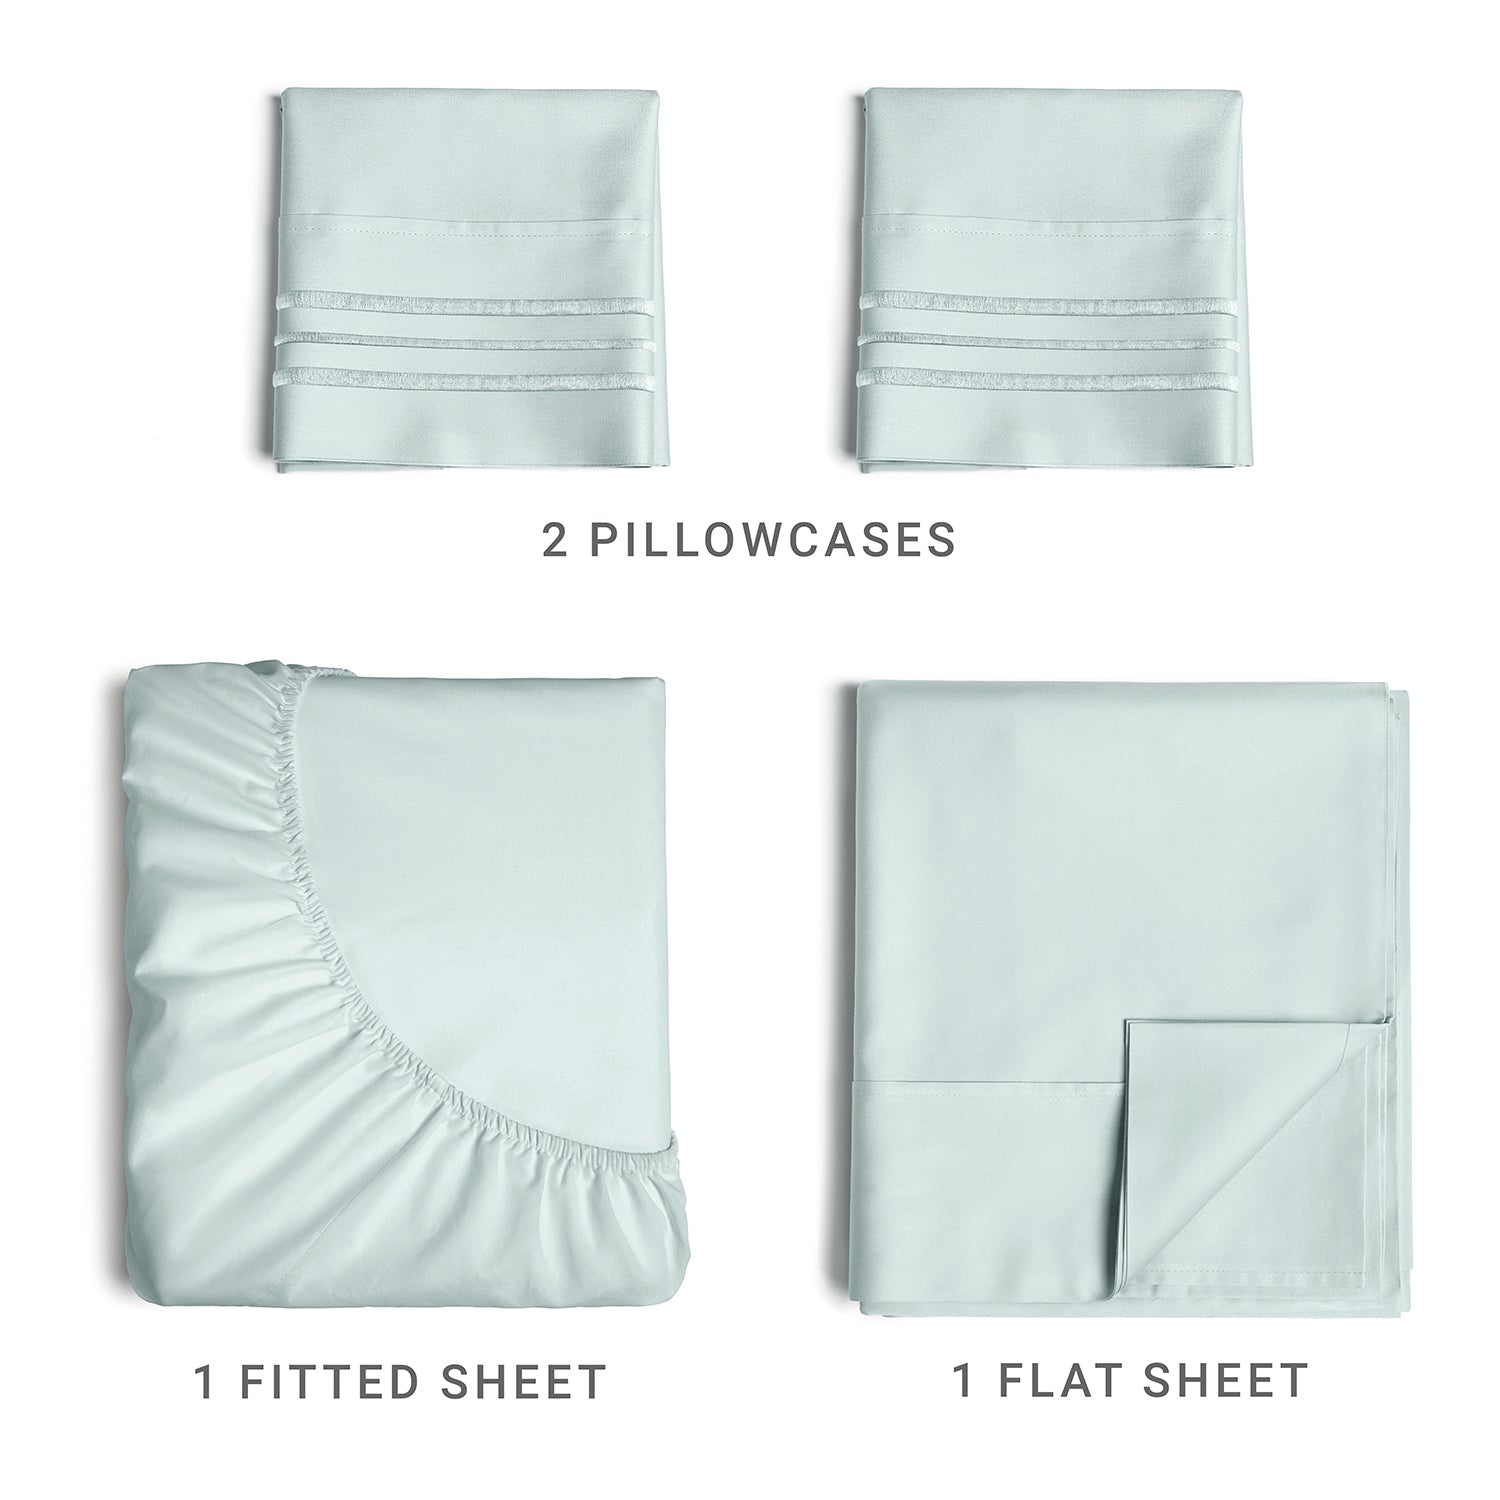 tes 4pc Sheet Set New Colors/Patterns - Ice Blue